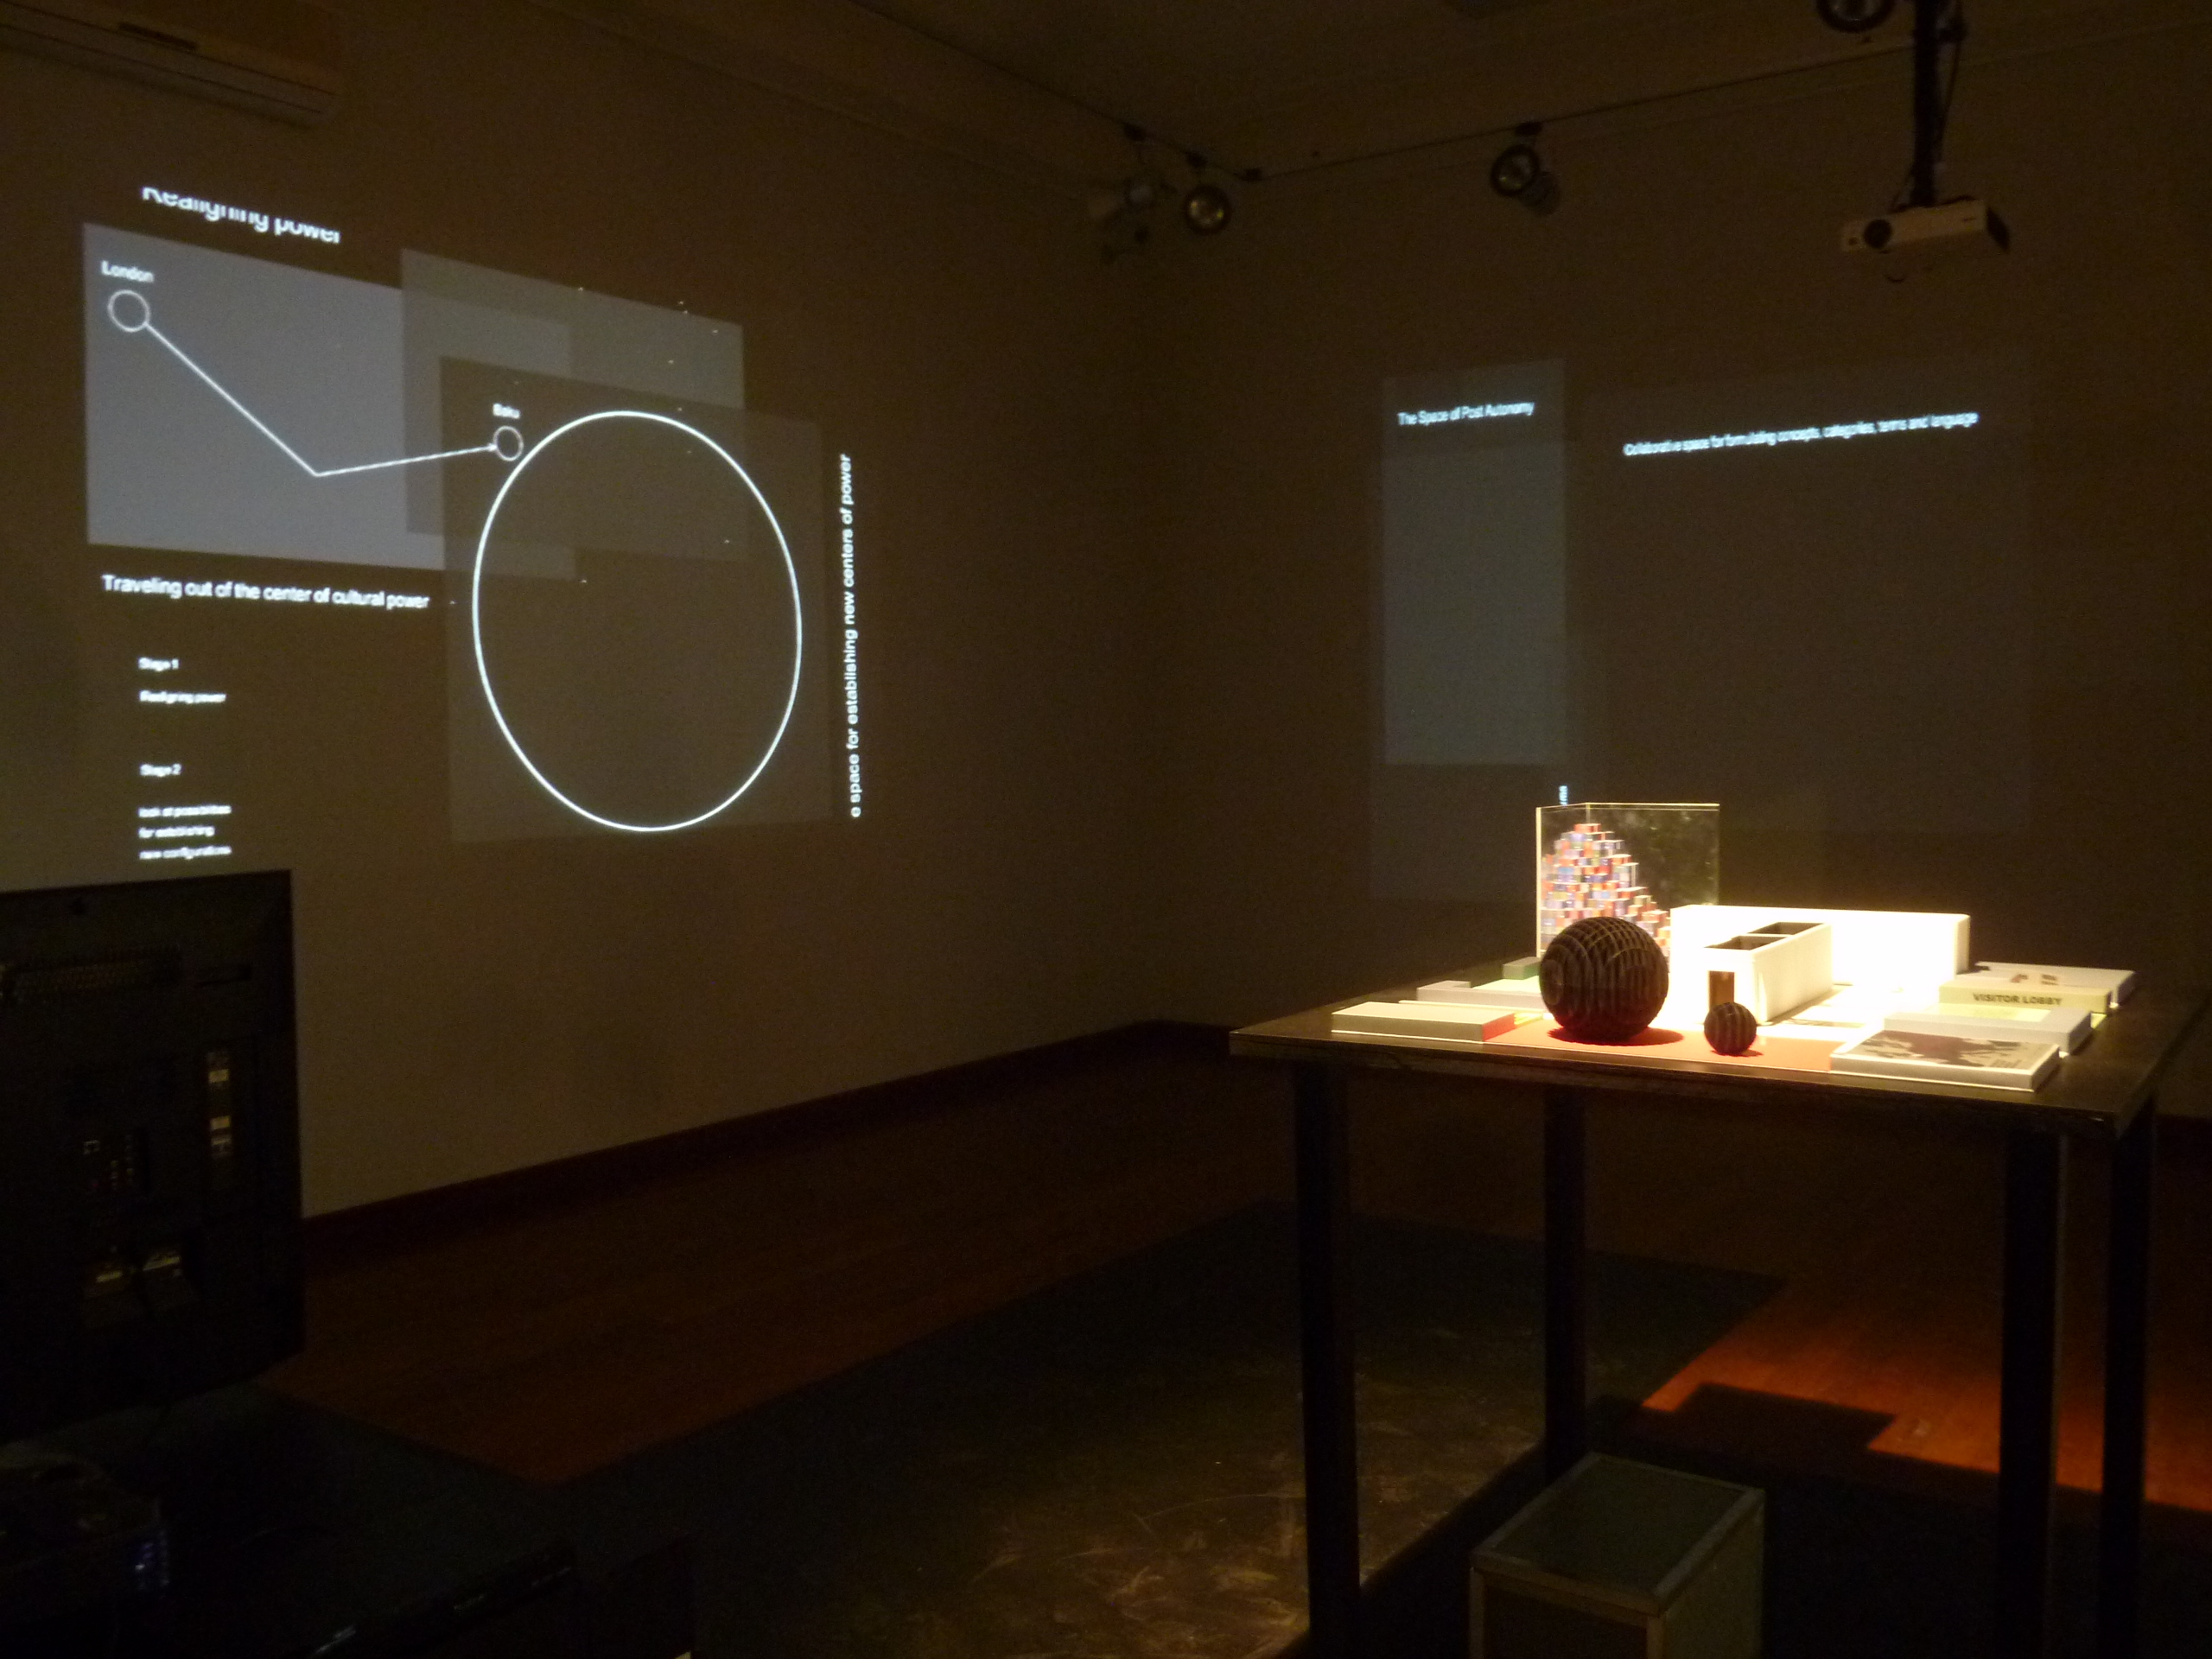 installation shot showing the kit, and 2 animations 